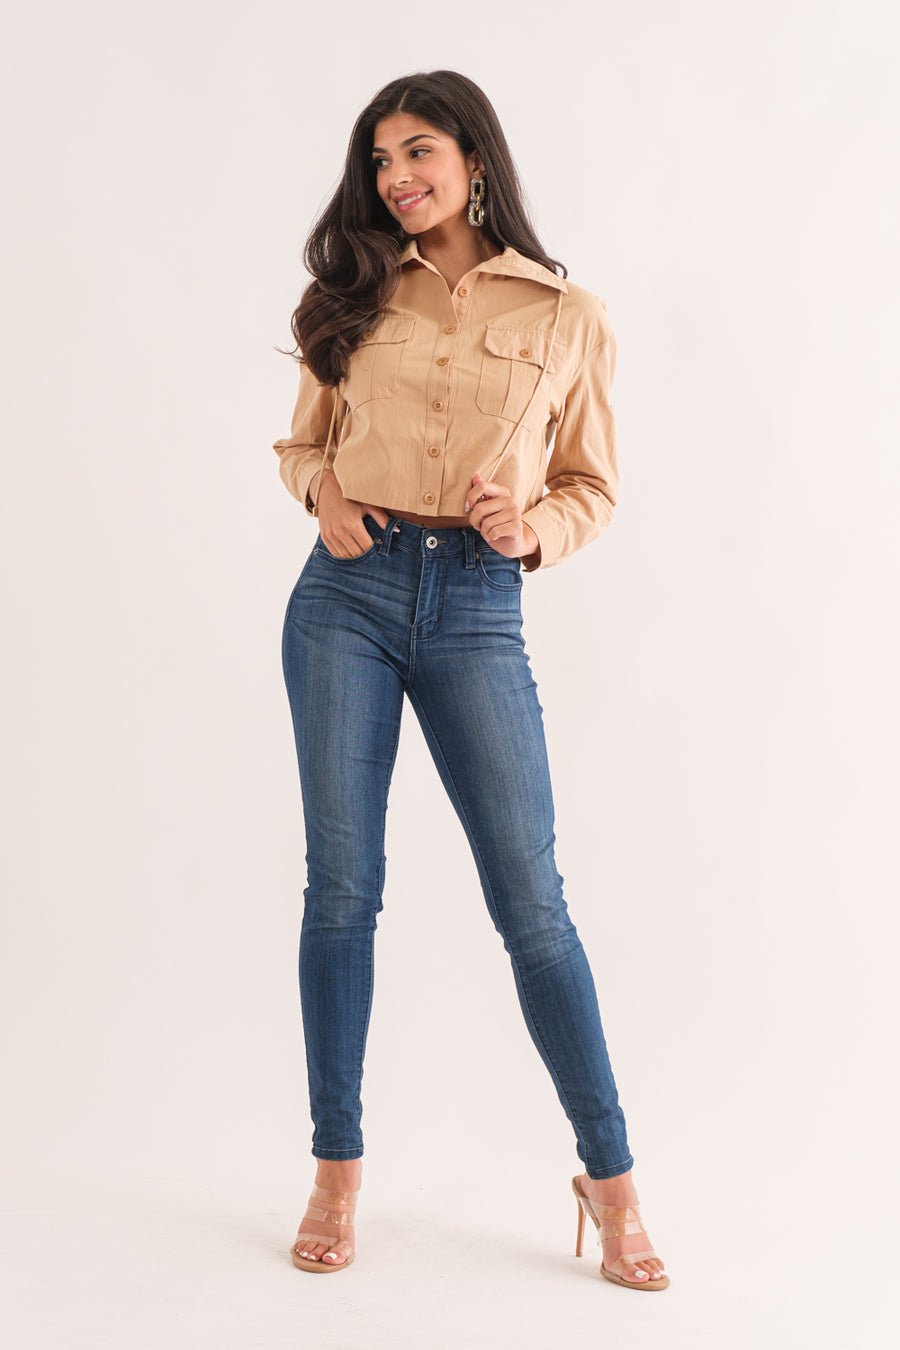 TCH9075-Long sleeve utility button up top